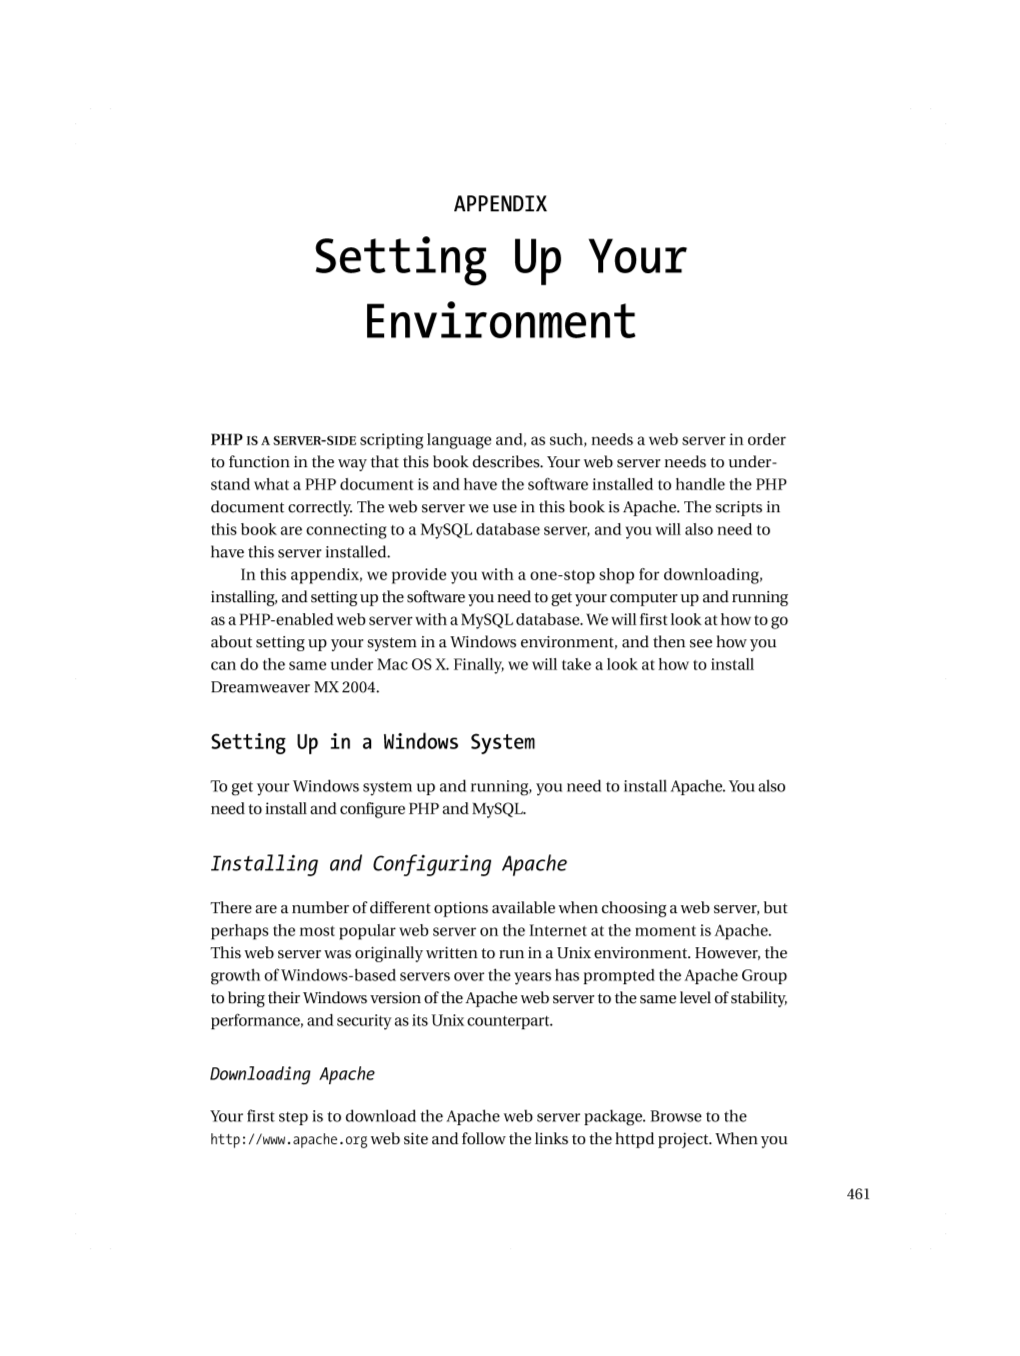 Setting up Your Environment